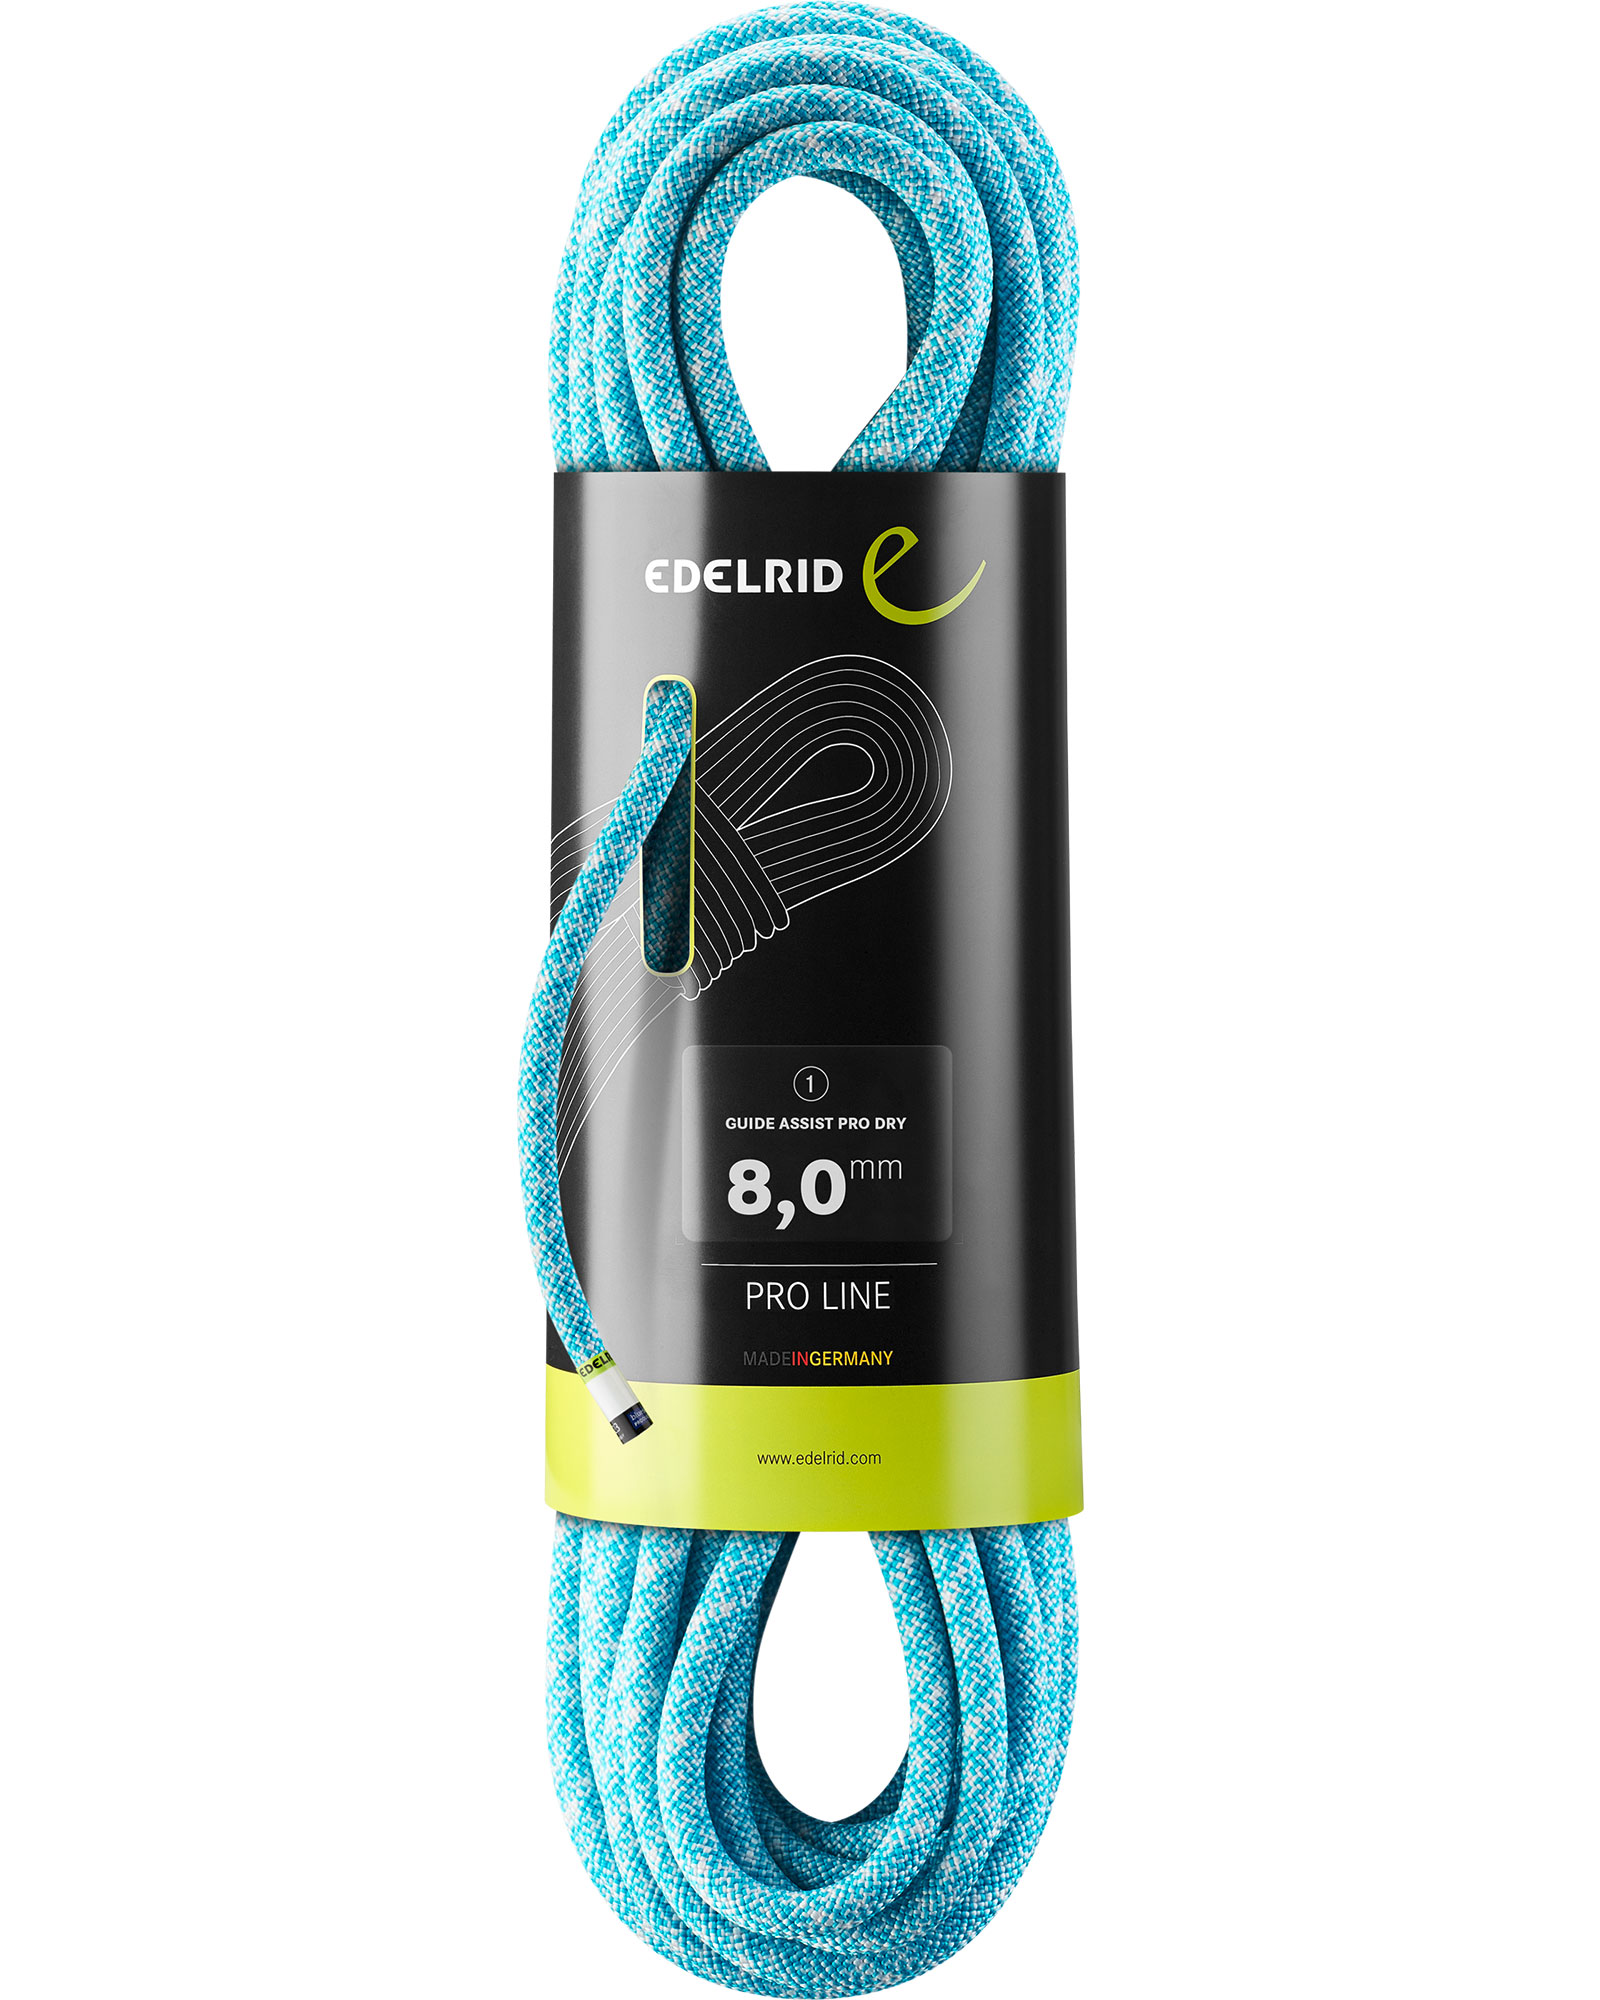 Edelrid Guide Assist Pro Dry 8.0 X 20 Rope